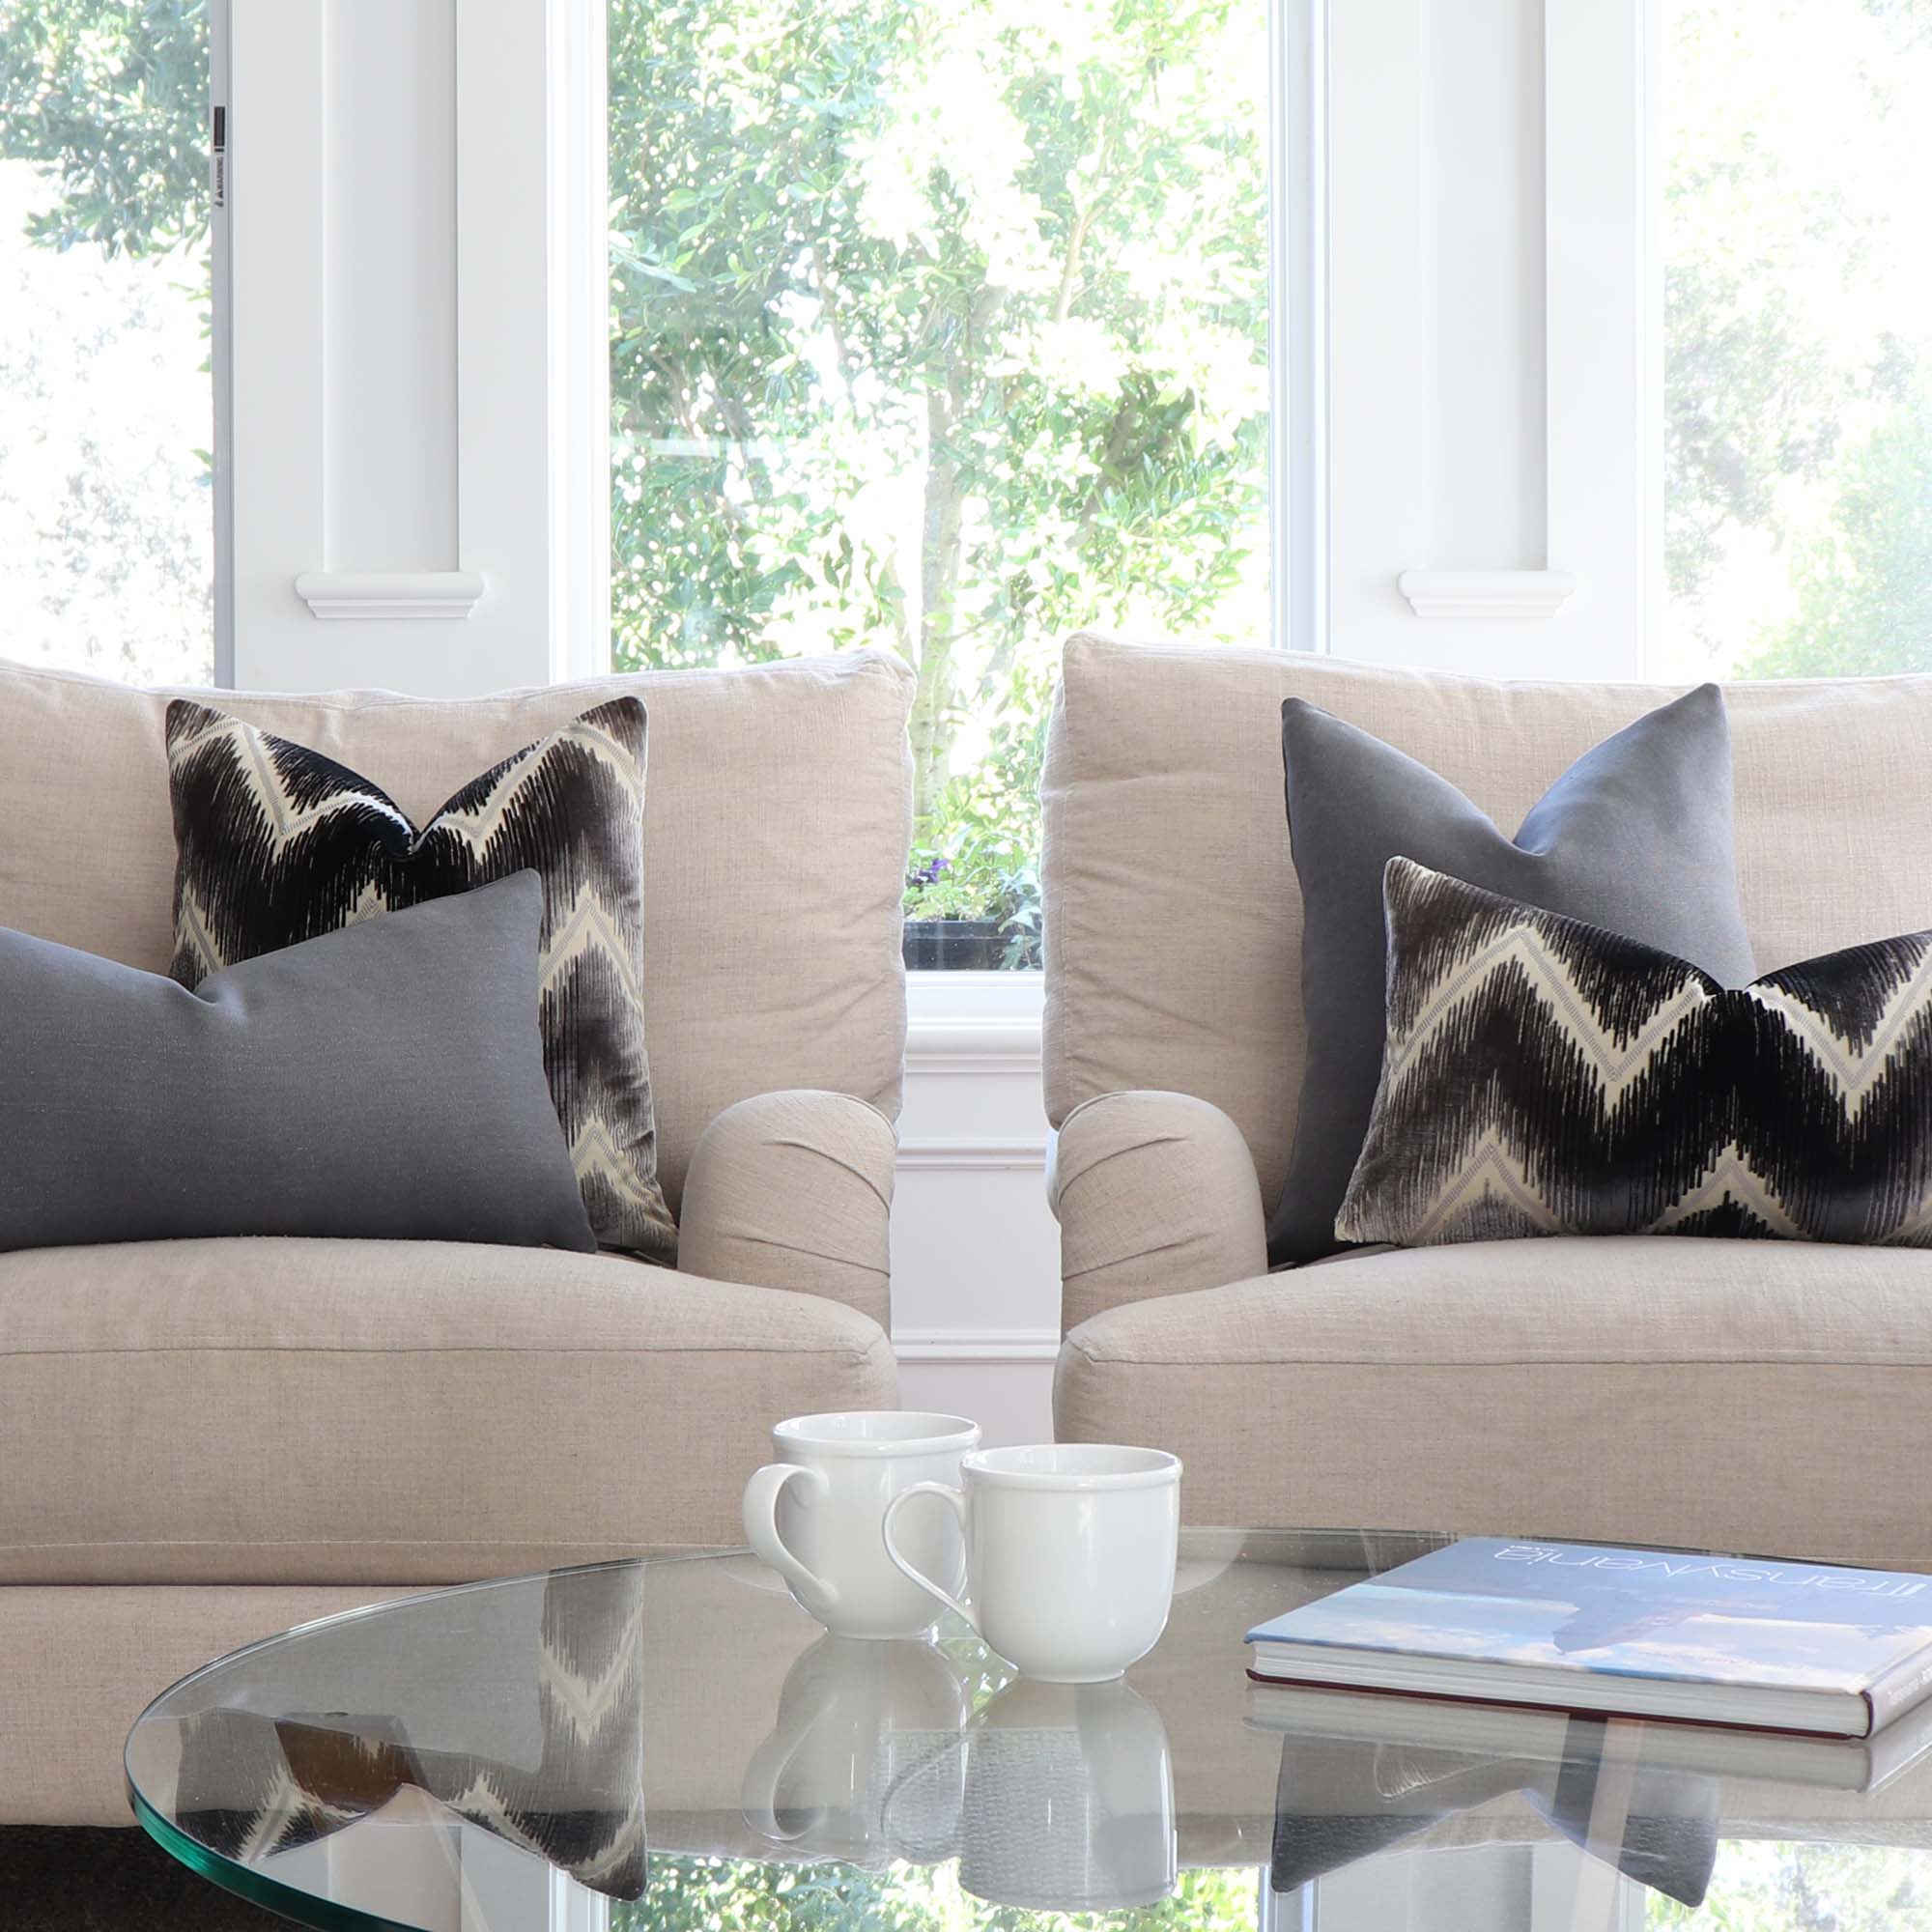 6 Throw Pillow Ideas To Refresh A Grey Or Beige Sofa - The Mom Edit